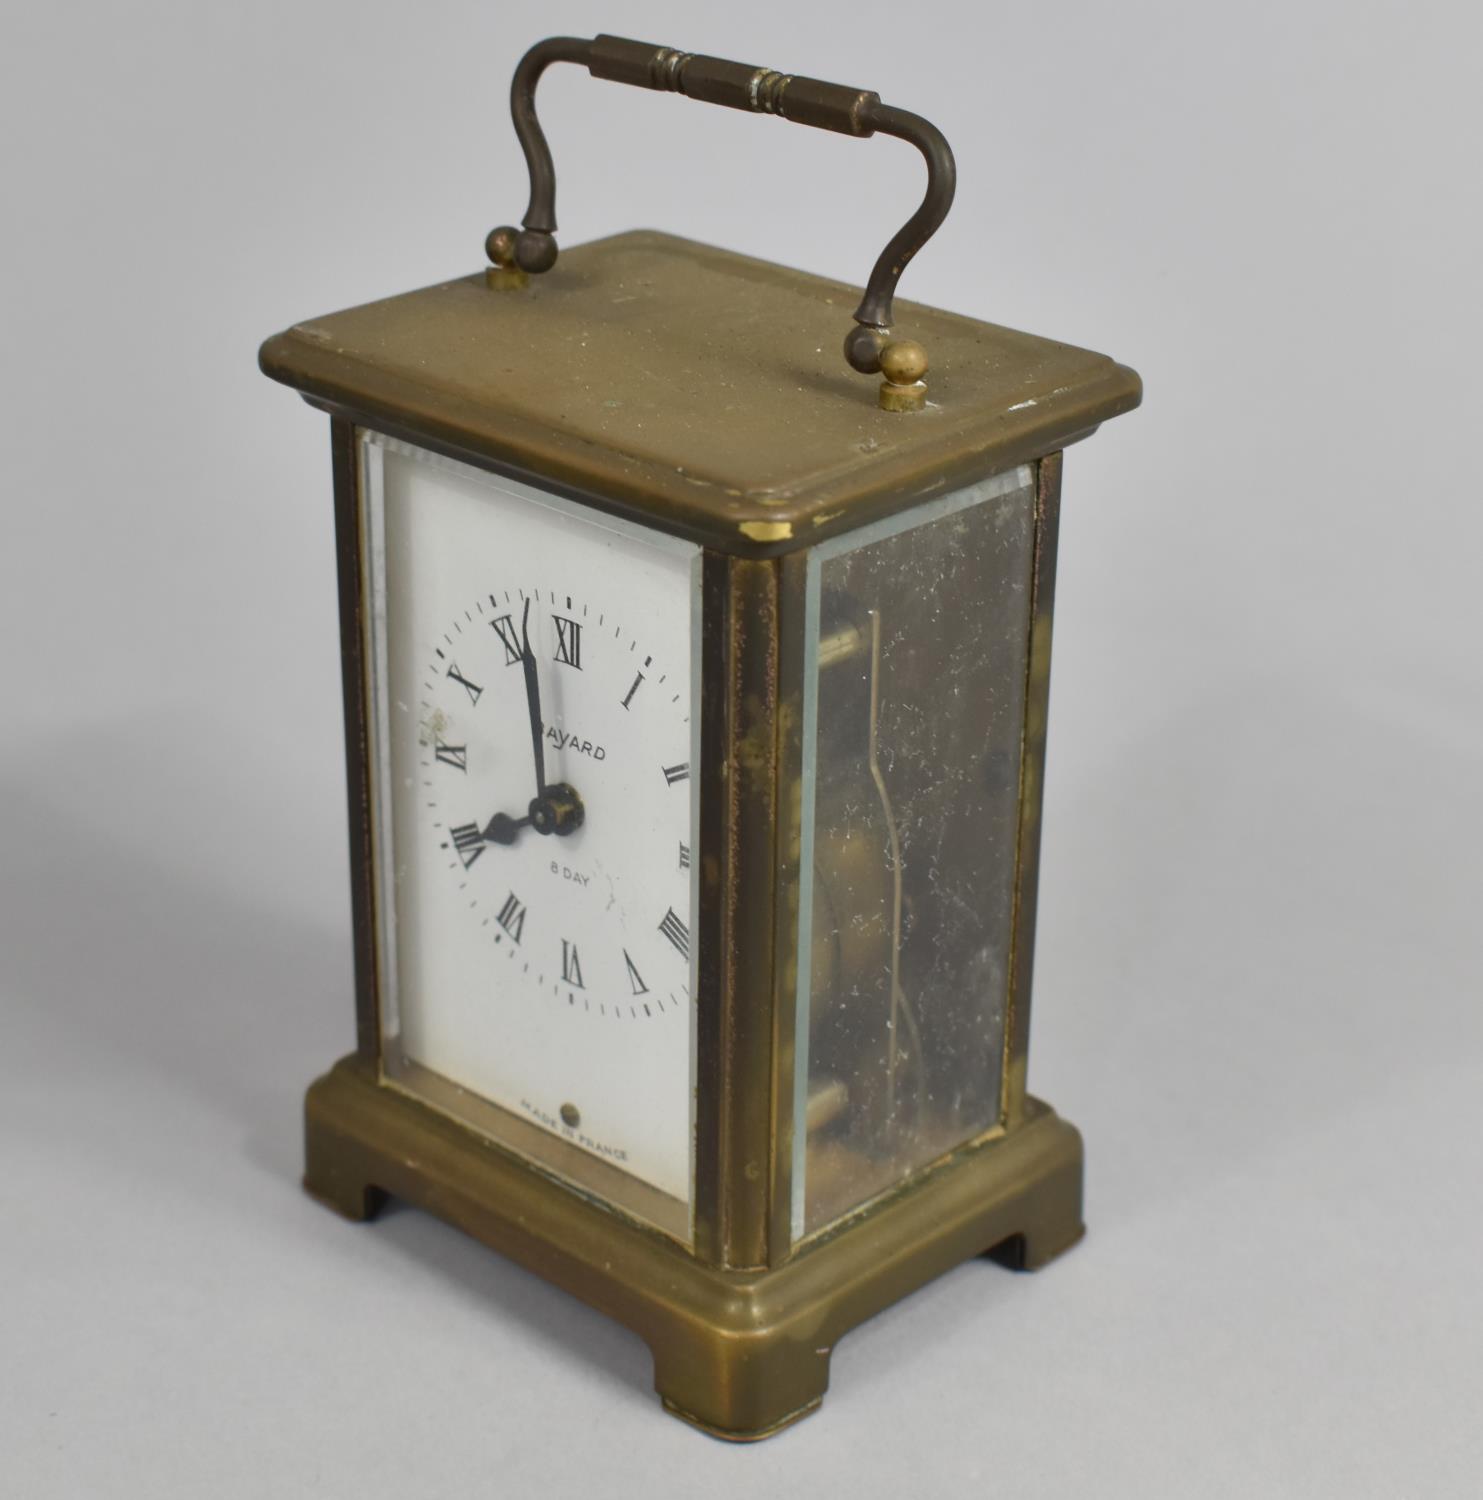 A Mid 20th Century French Brass Cased Carriage Clock by Duverdrey & Bloquel - Image 2 of 3